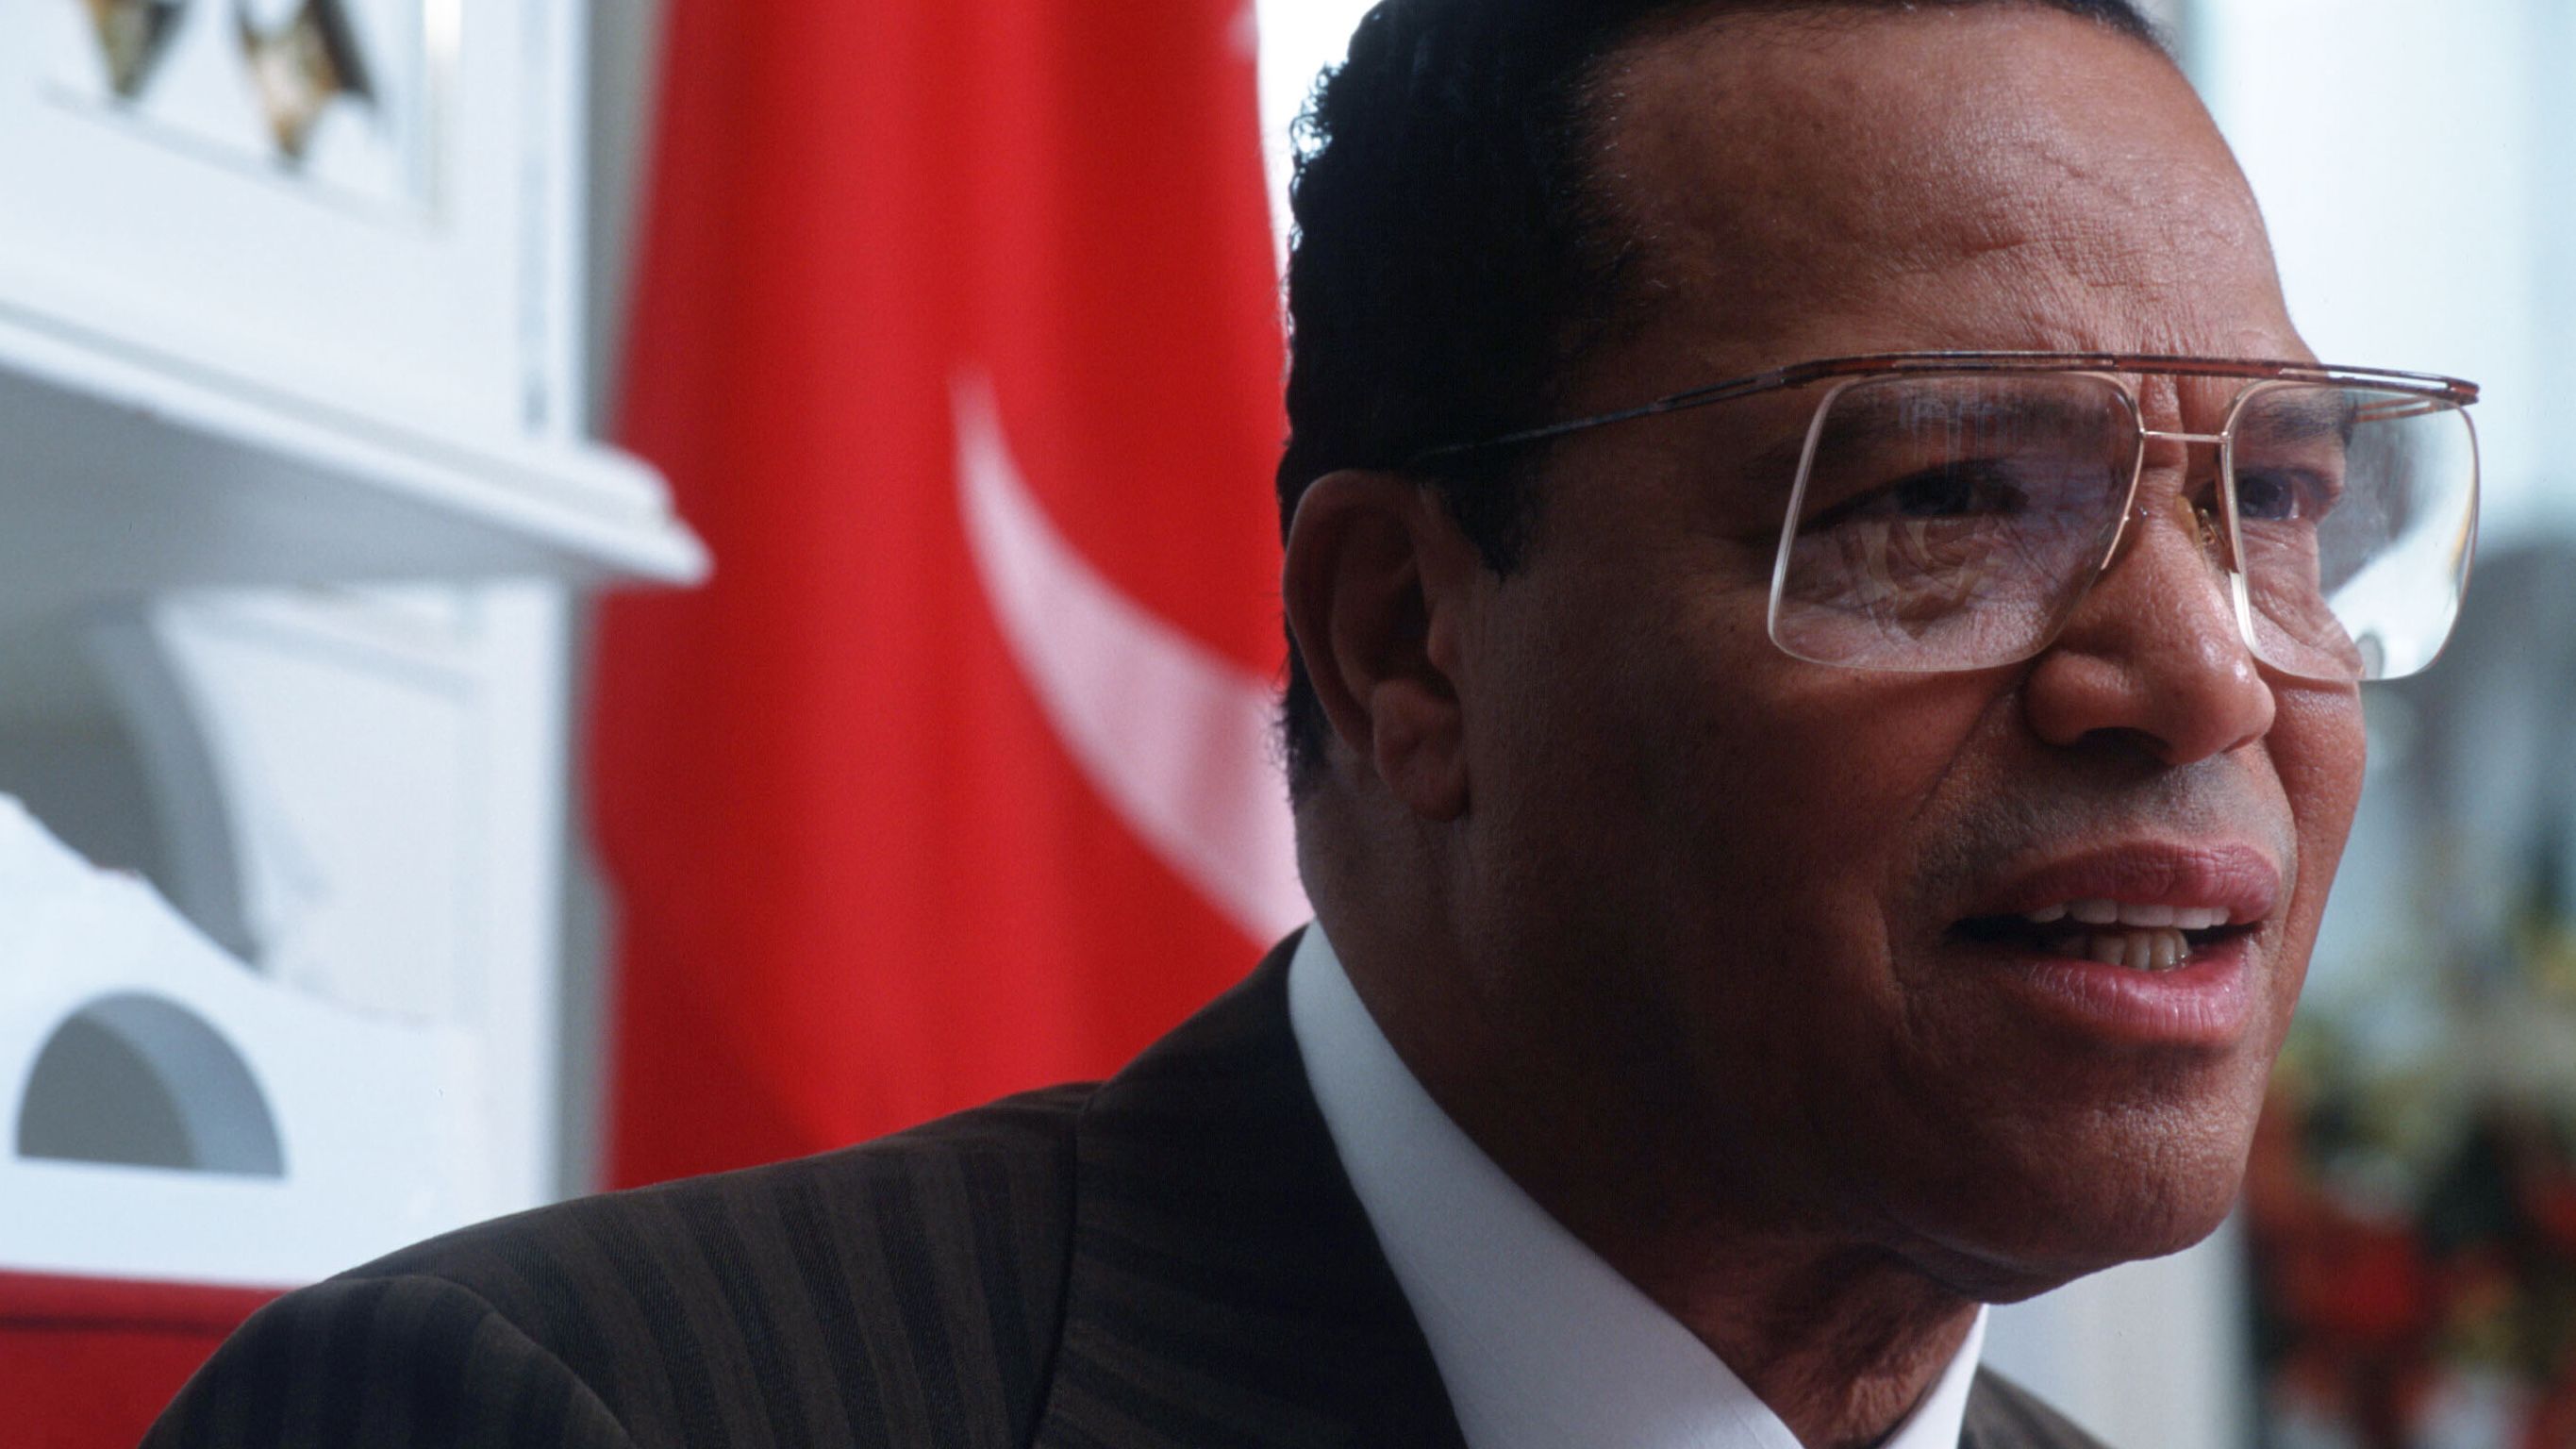 Louis Farrakhan founded the reorganized Nation of Islam, which adheres to the teachings of Elijah Muhammad. (Photo by Jean-Marc Giboux/Liaison)